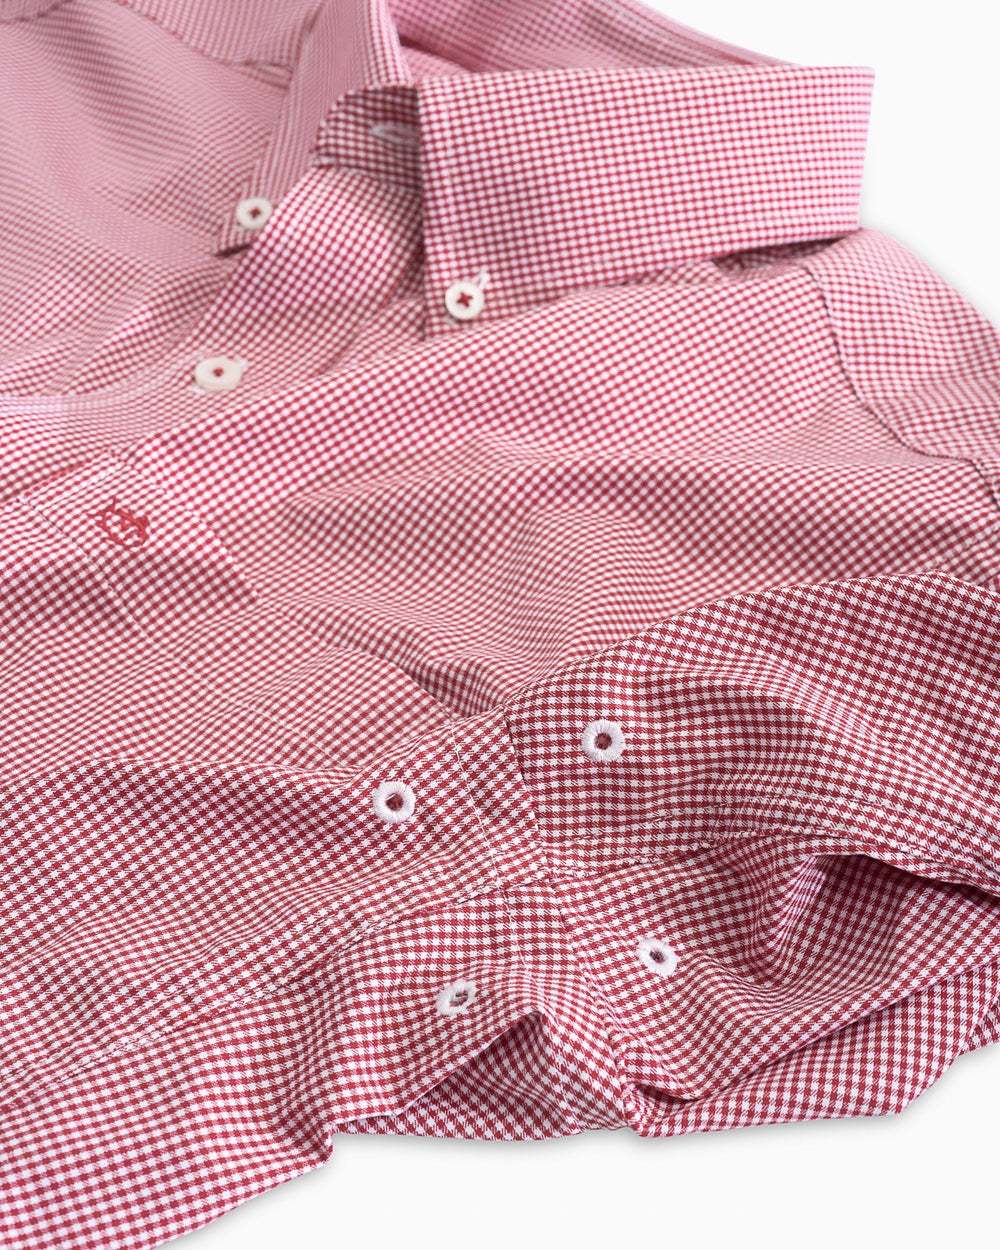 The collar of the Men's Red Micro Gingham Intercoastal Performance Sport Shirt by Southern Tide - true red